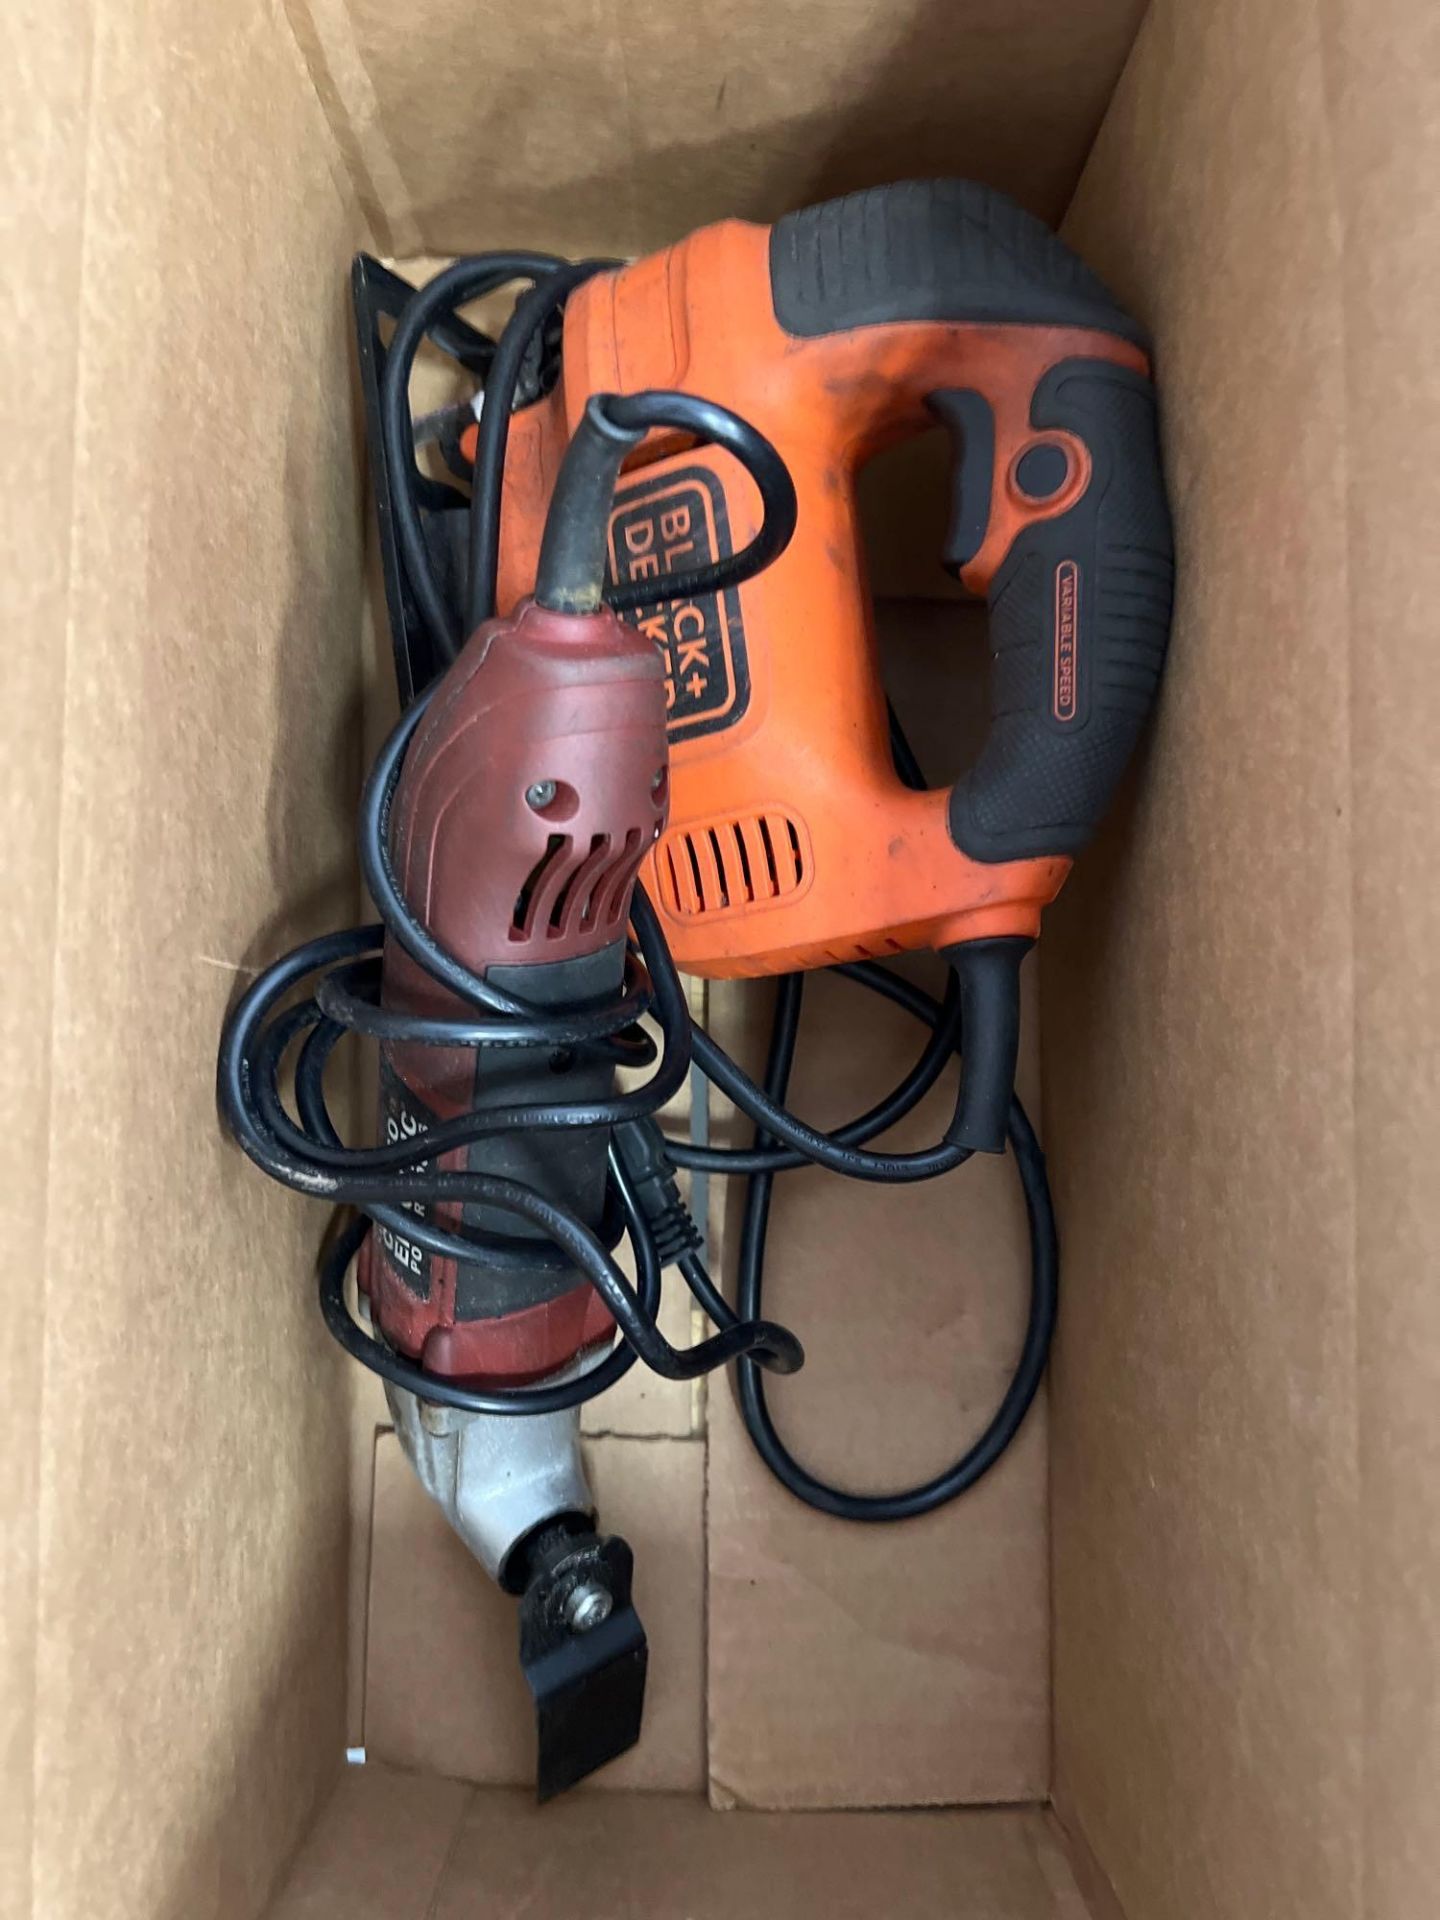 Skid of Misc. Electric Power Tools & Misc. items - Image 15 of 20